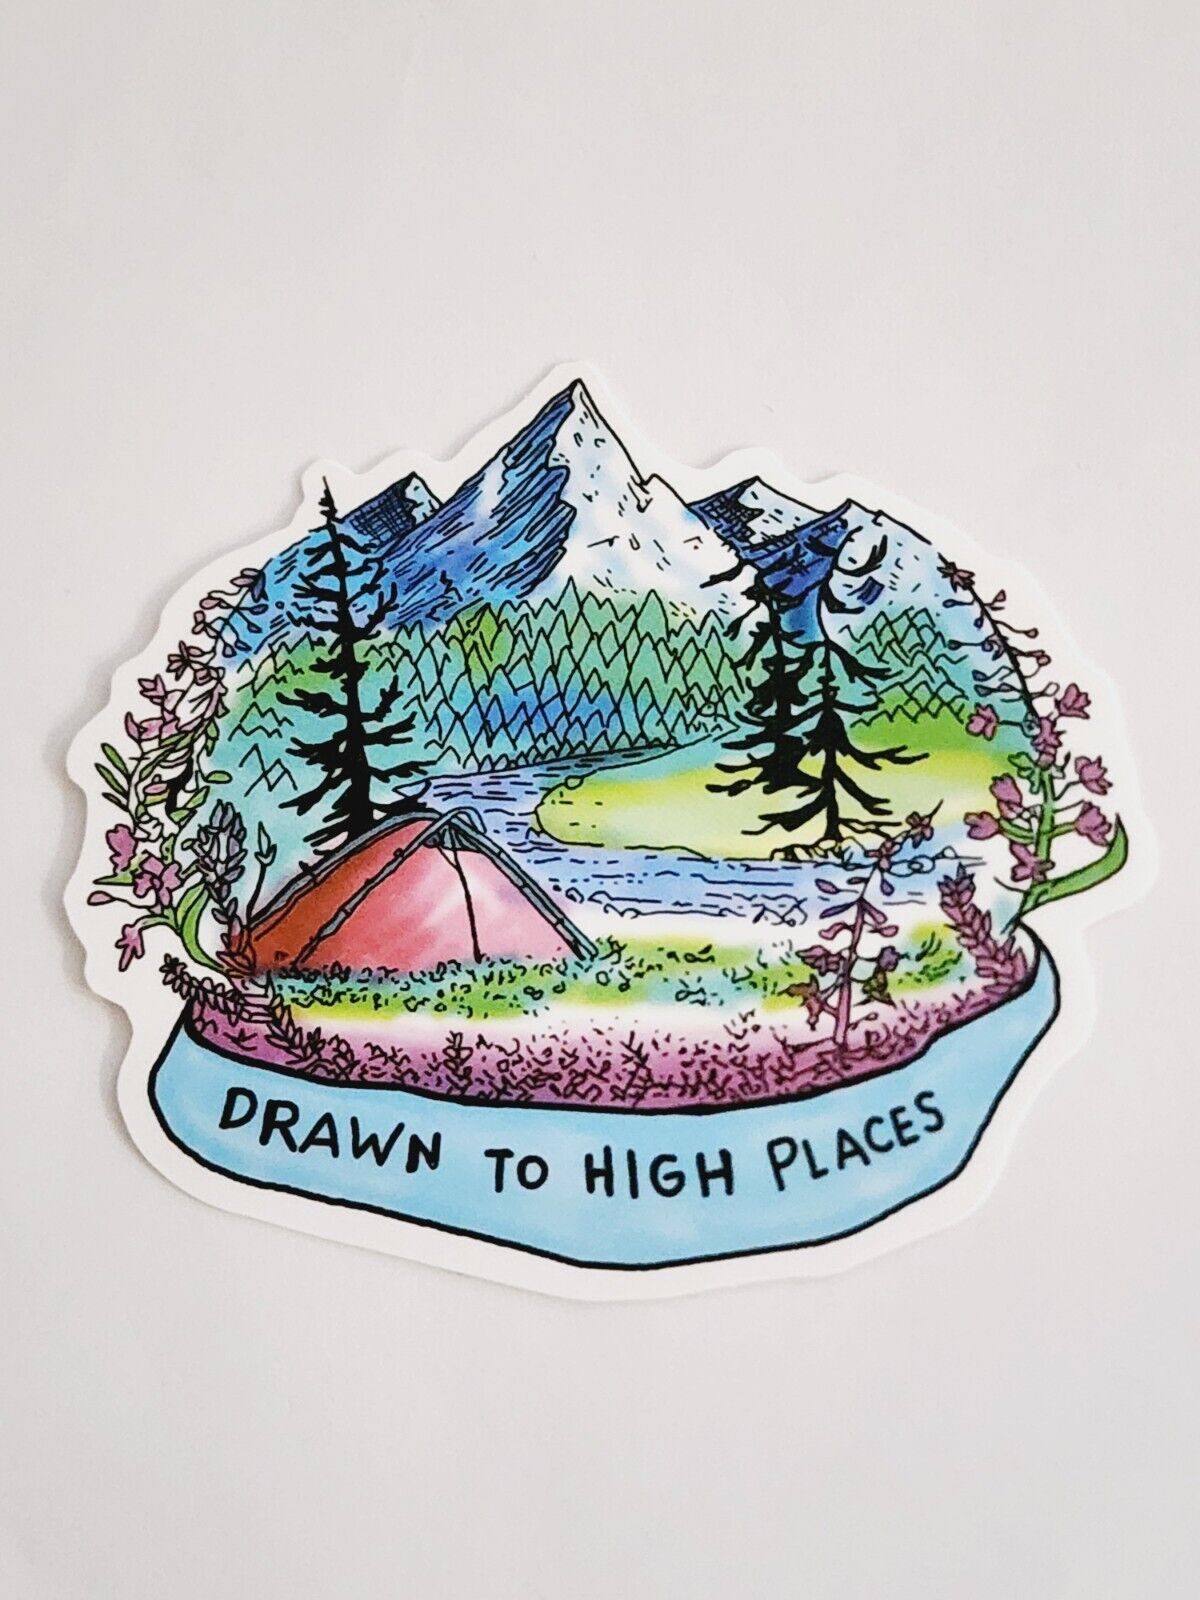 Drawn to High Places Tent in Mountains Sticker Decal Multicolor Embellishment